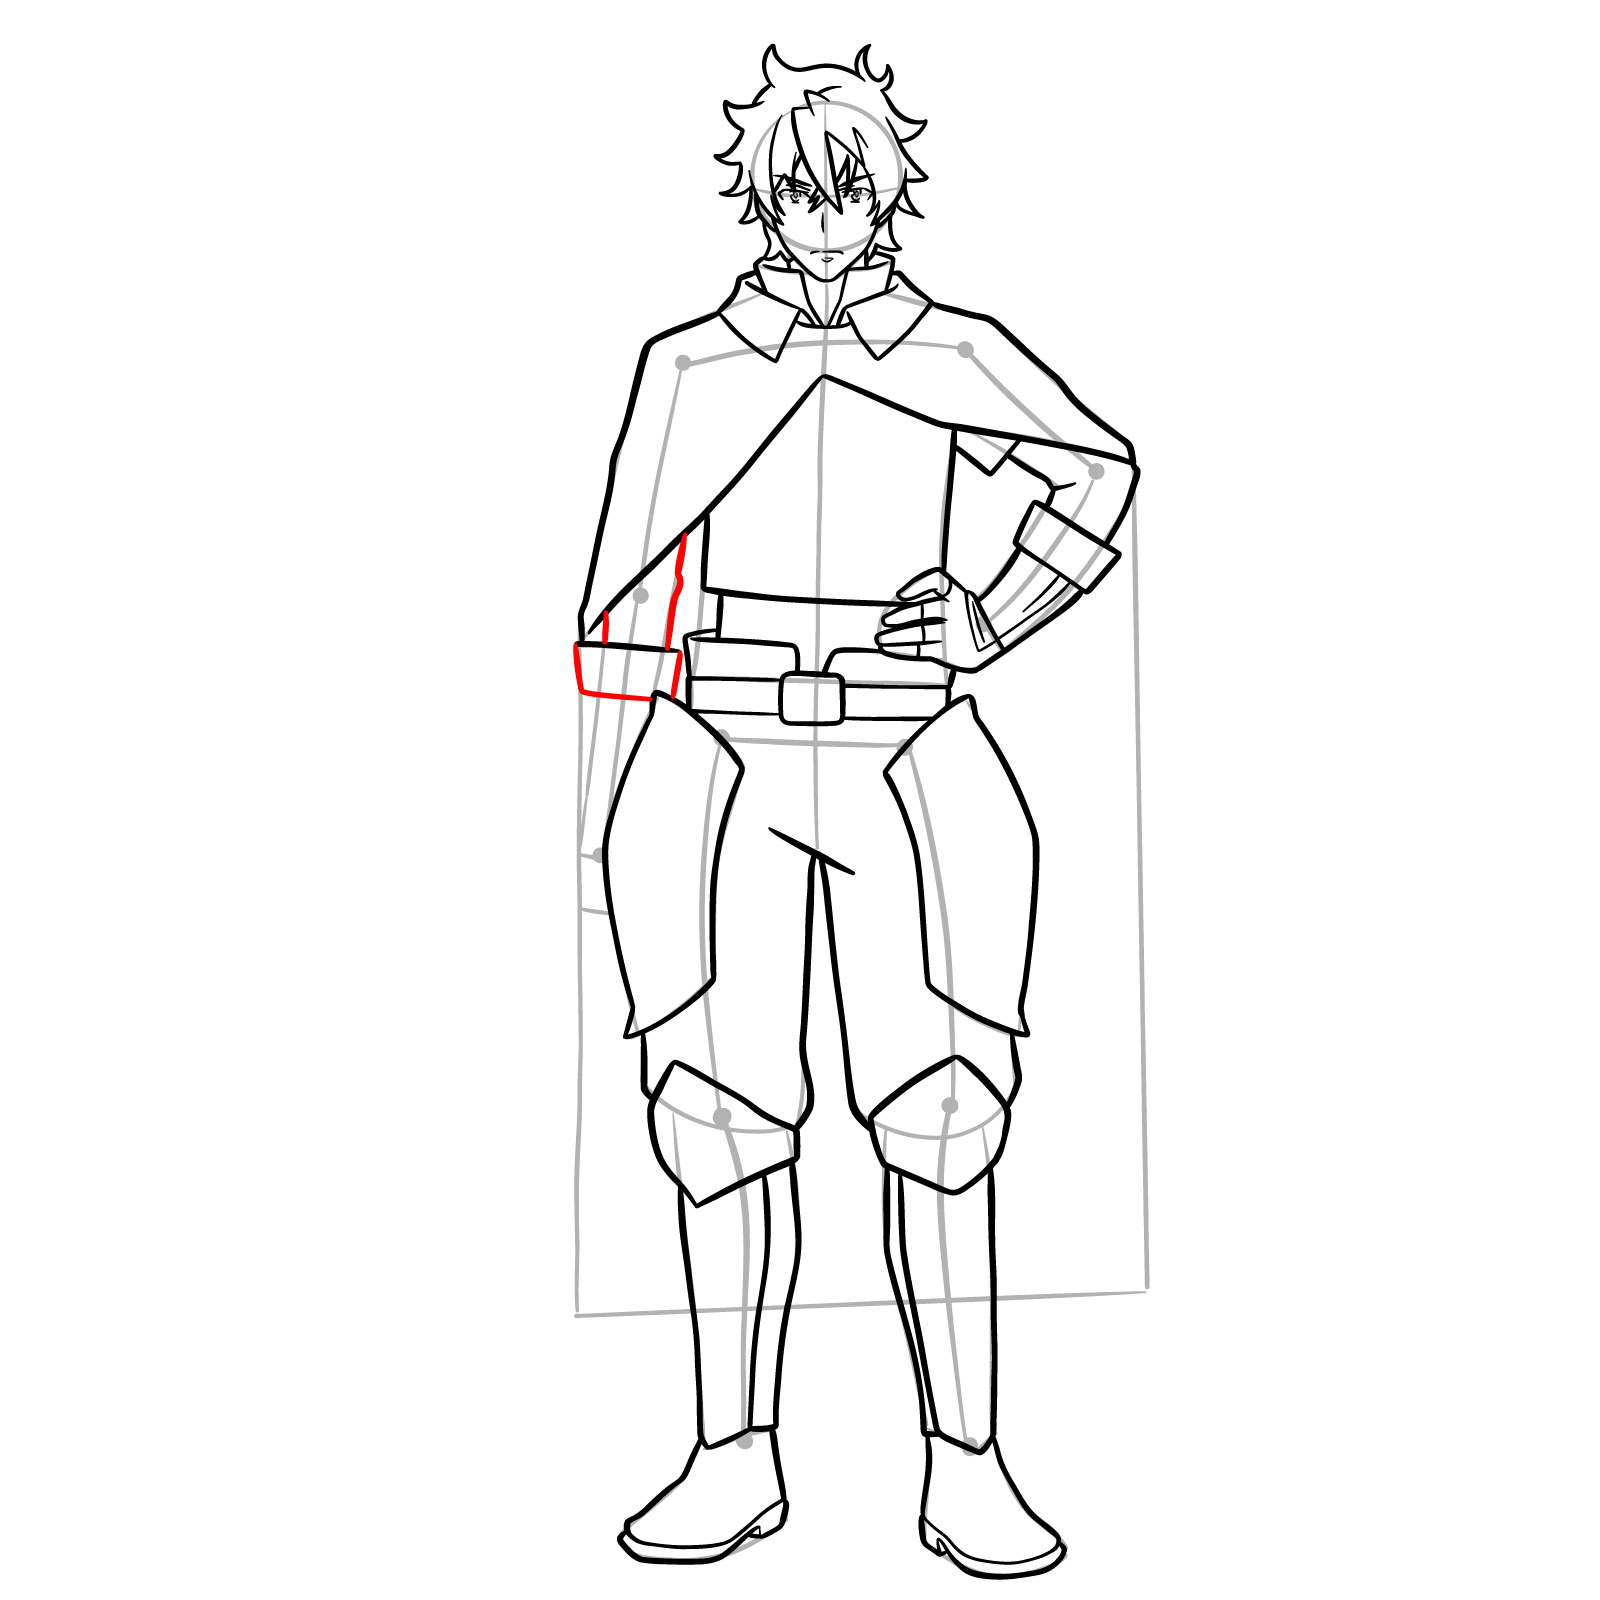 How to draw Naofumi Iwatani from The Rising of the Shield Hero - step 21